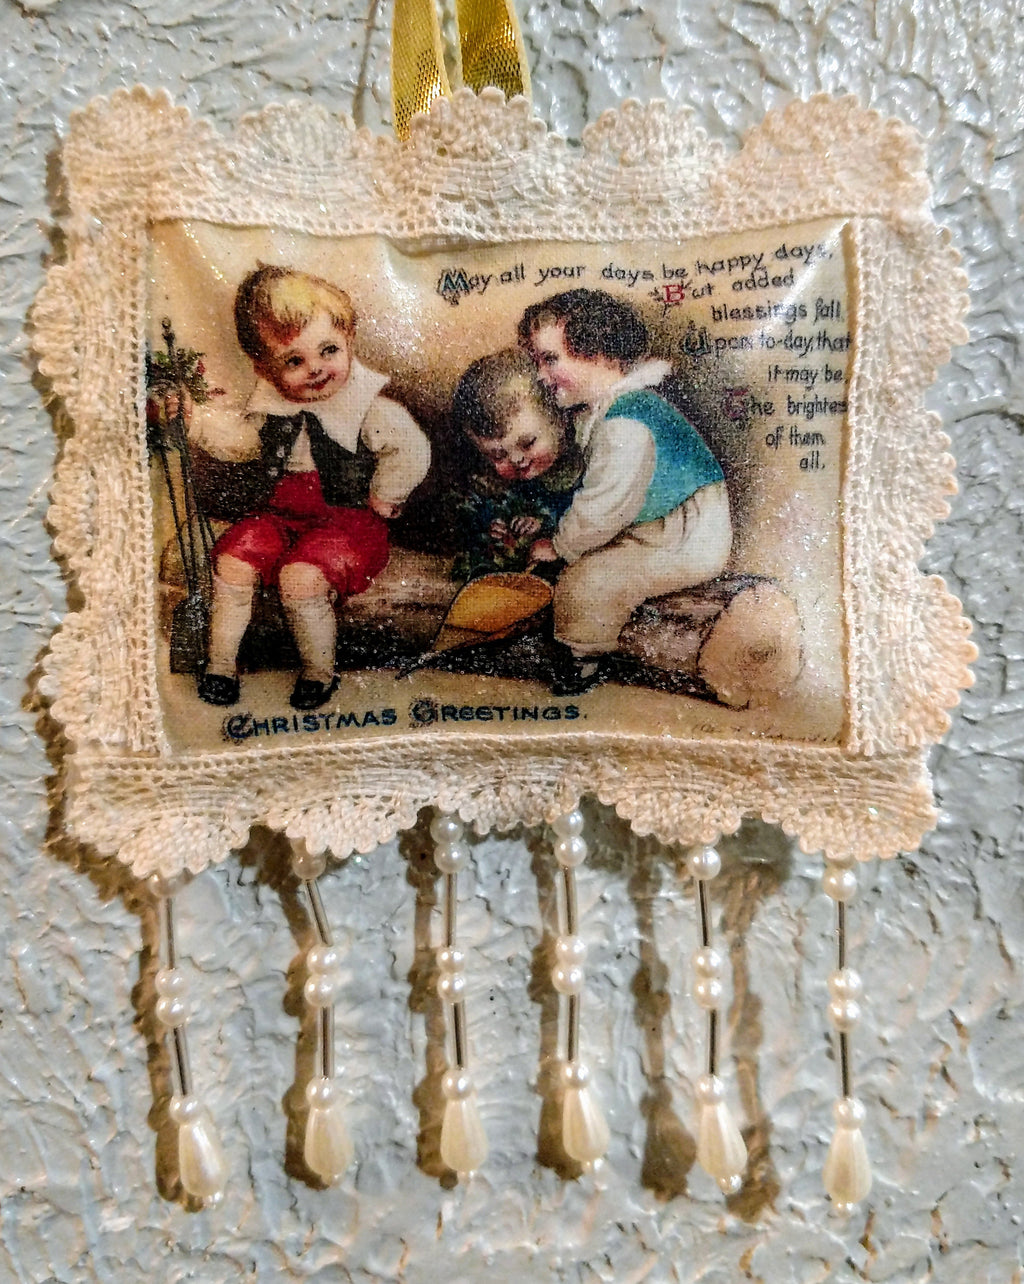 Vintage Greetings Ornament Sachet - Happy Days - One of a Kind!